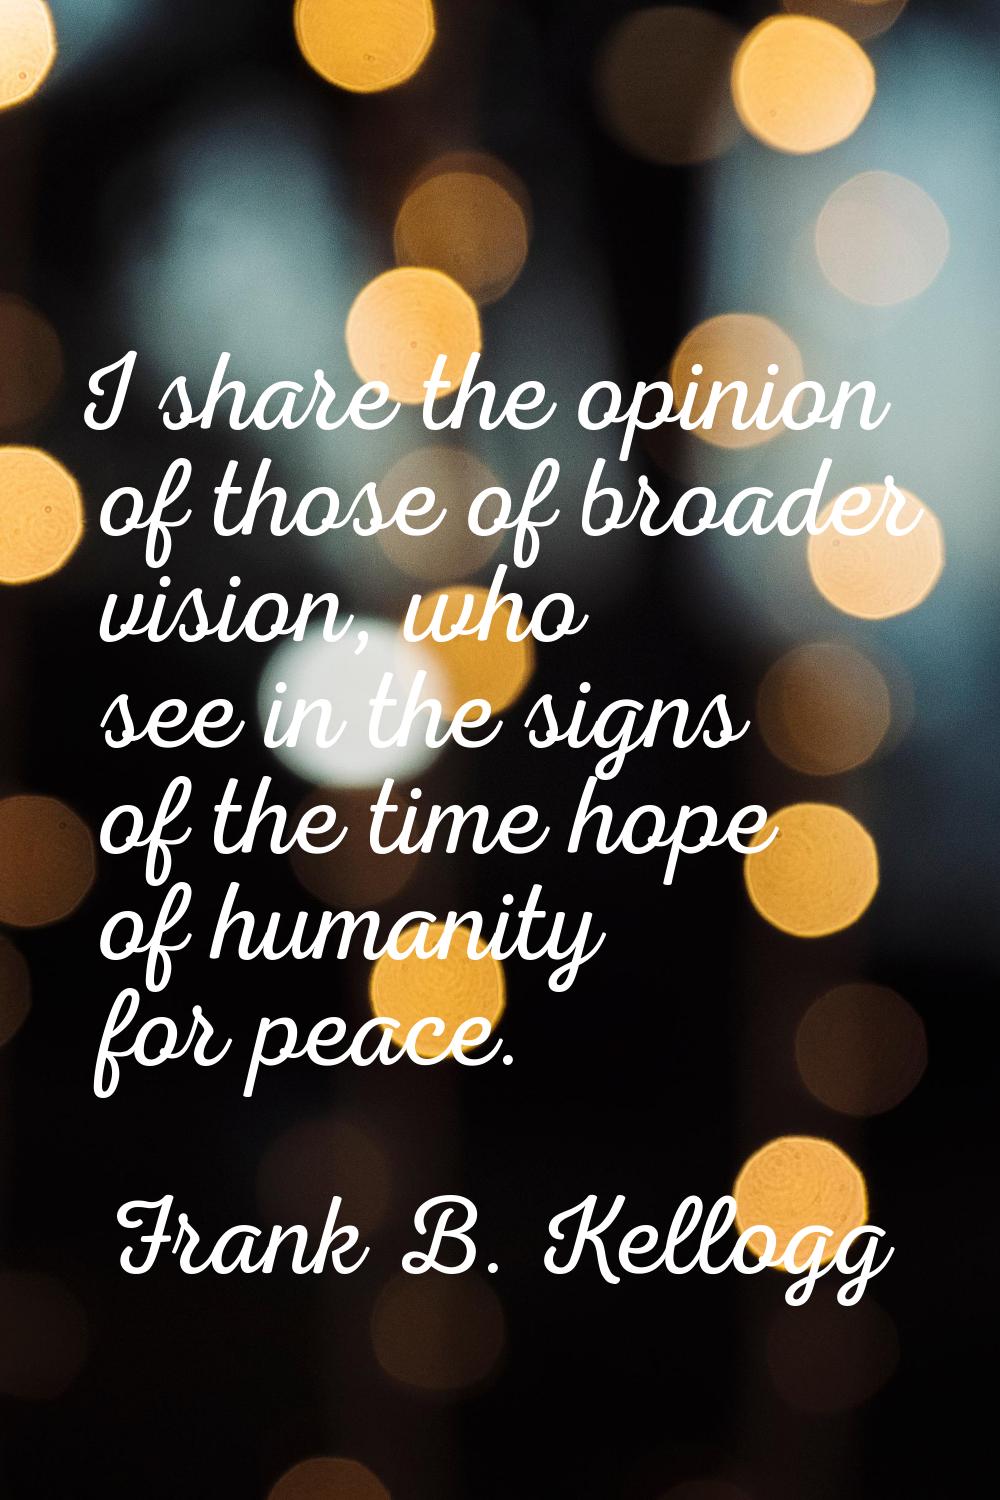 I share the opinion of those of broader vision, who see in the signs of the time hope of humanity f